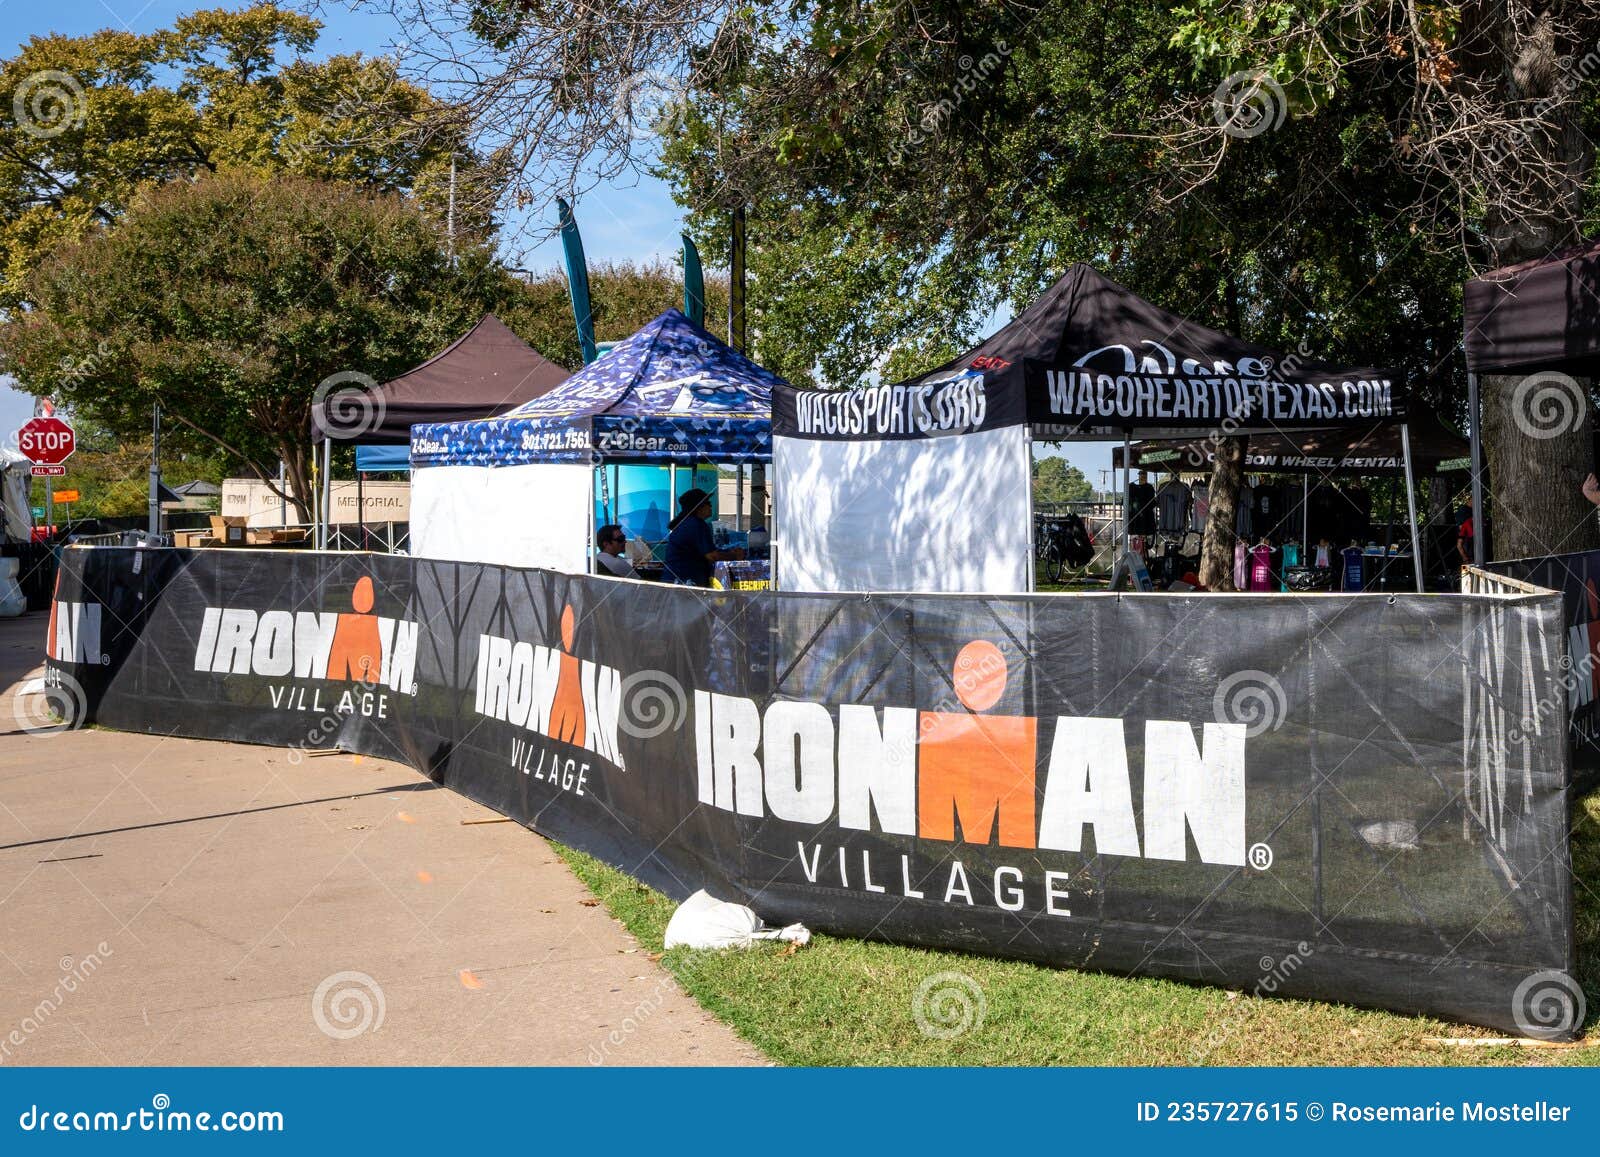 IRONMAN Village Setup for the Inaugural Ironman Waco Event Editorial